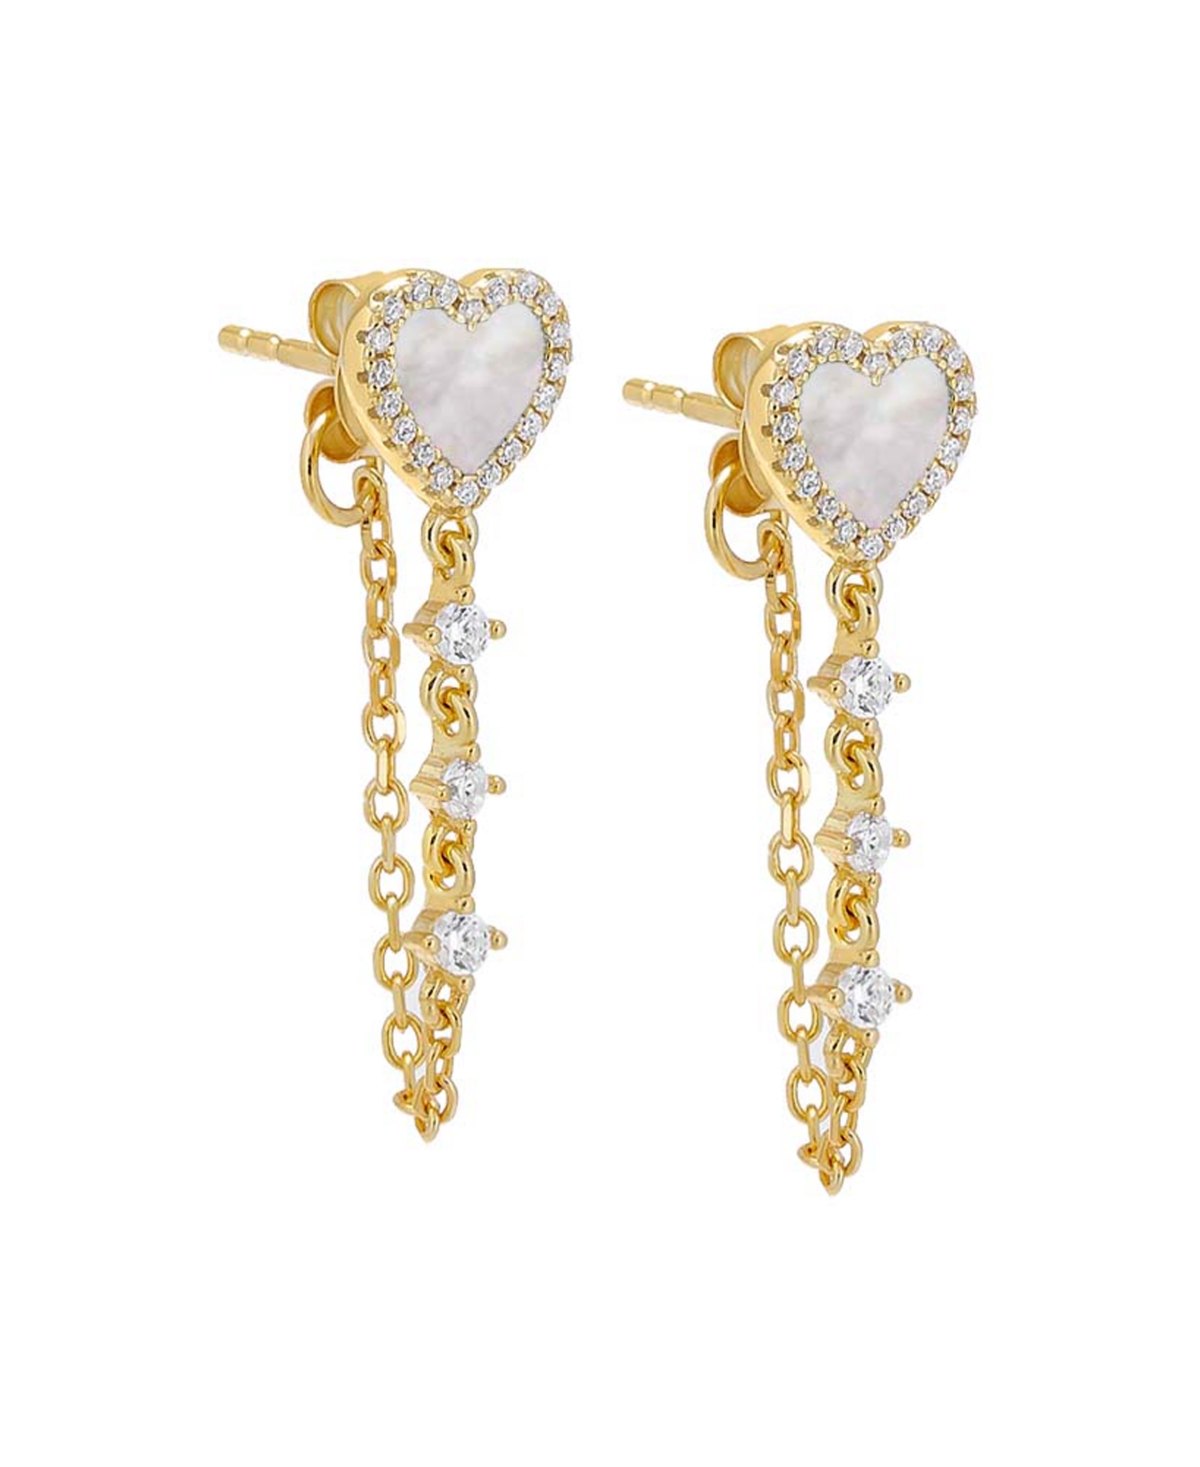 By Adina Eden 14k Gold-plated Sterling Silver Pave & Mother-of-pearl Heart Front-to-back Earrings In White